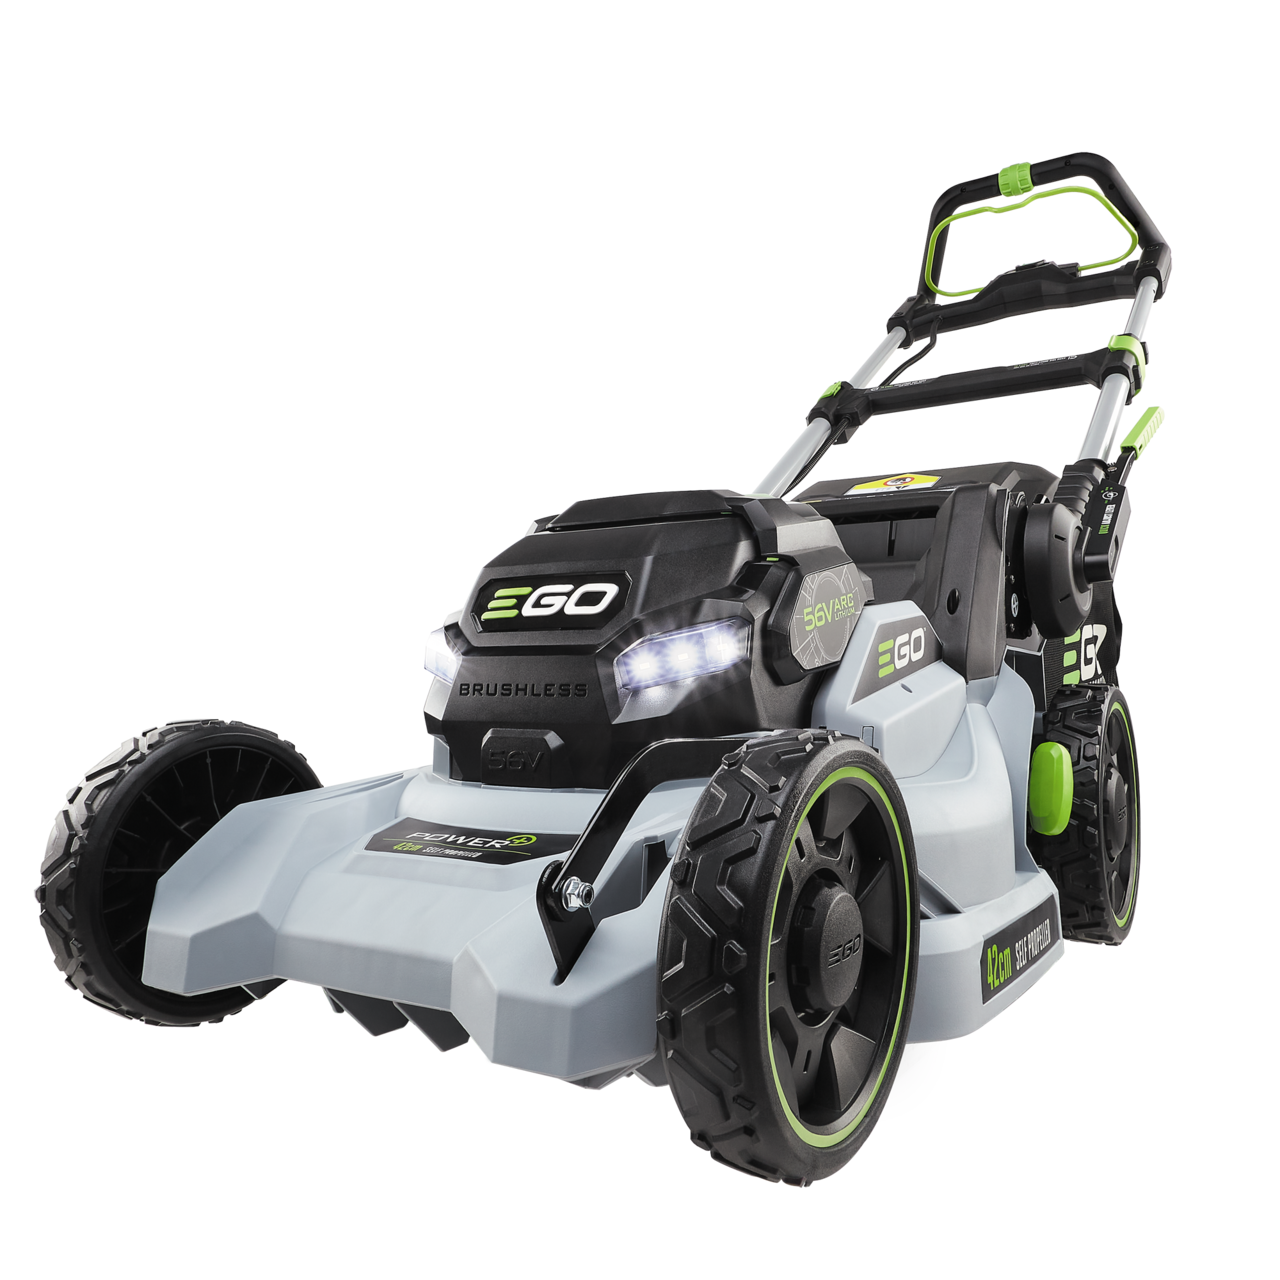 ego-lm1702e-sp-42cm-mower-kit-with-4ah-battery-and-standard-charger